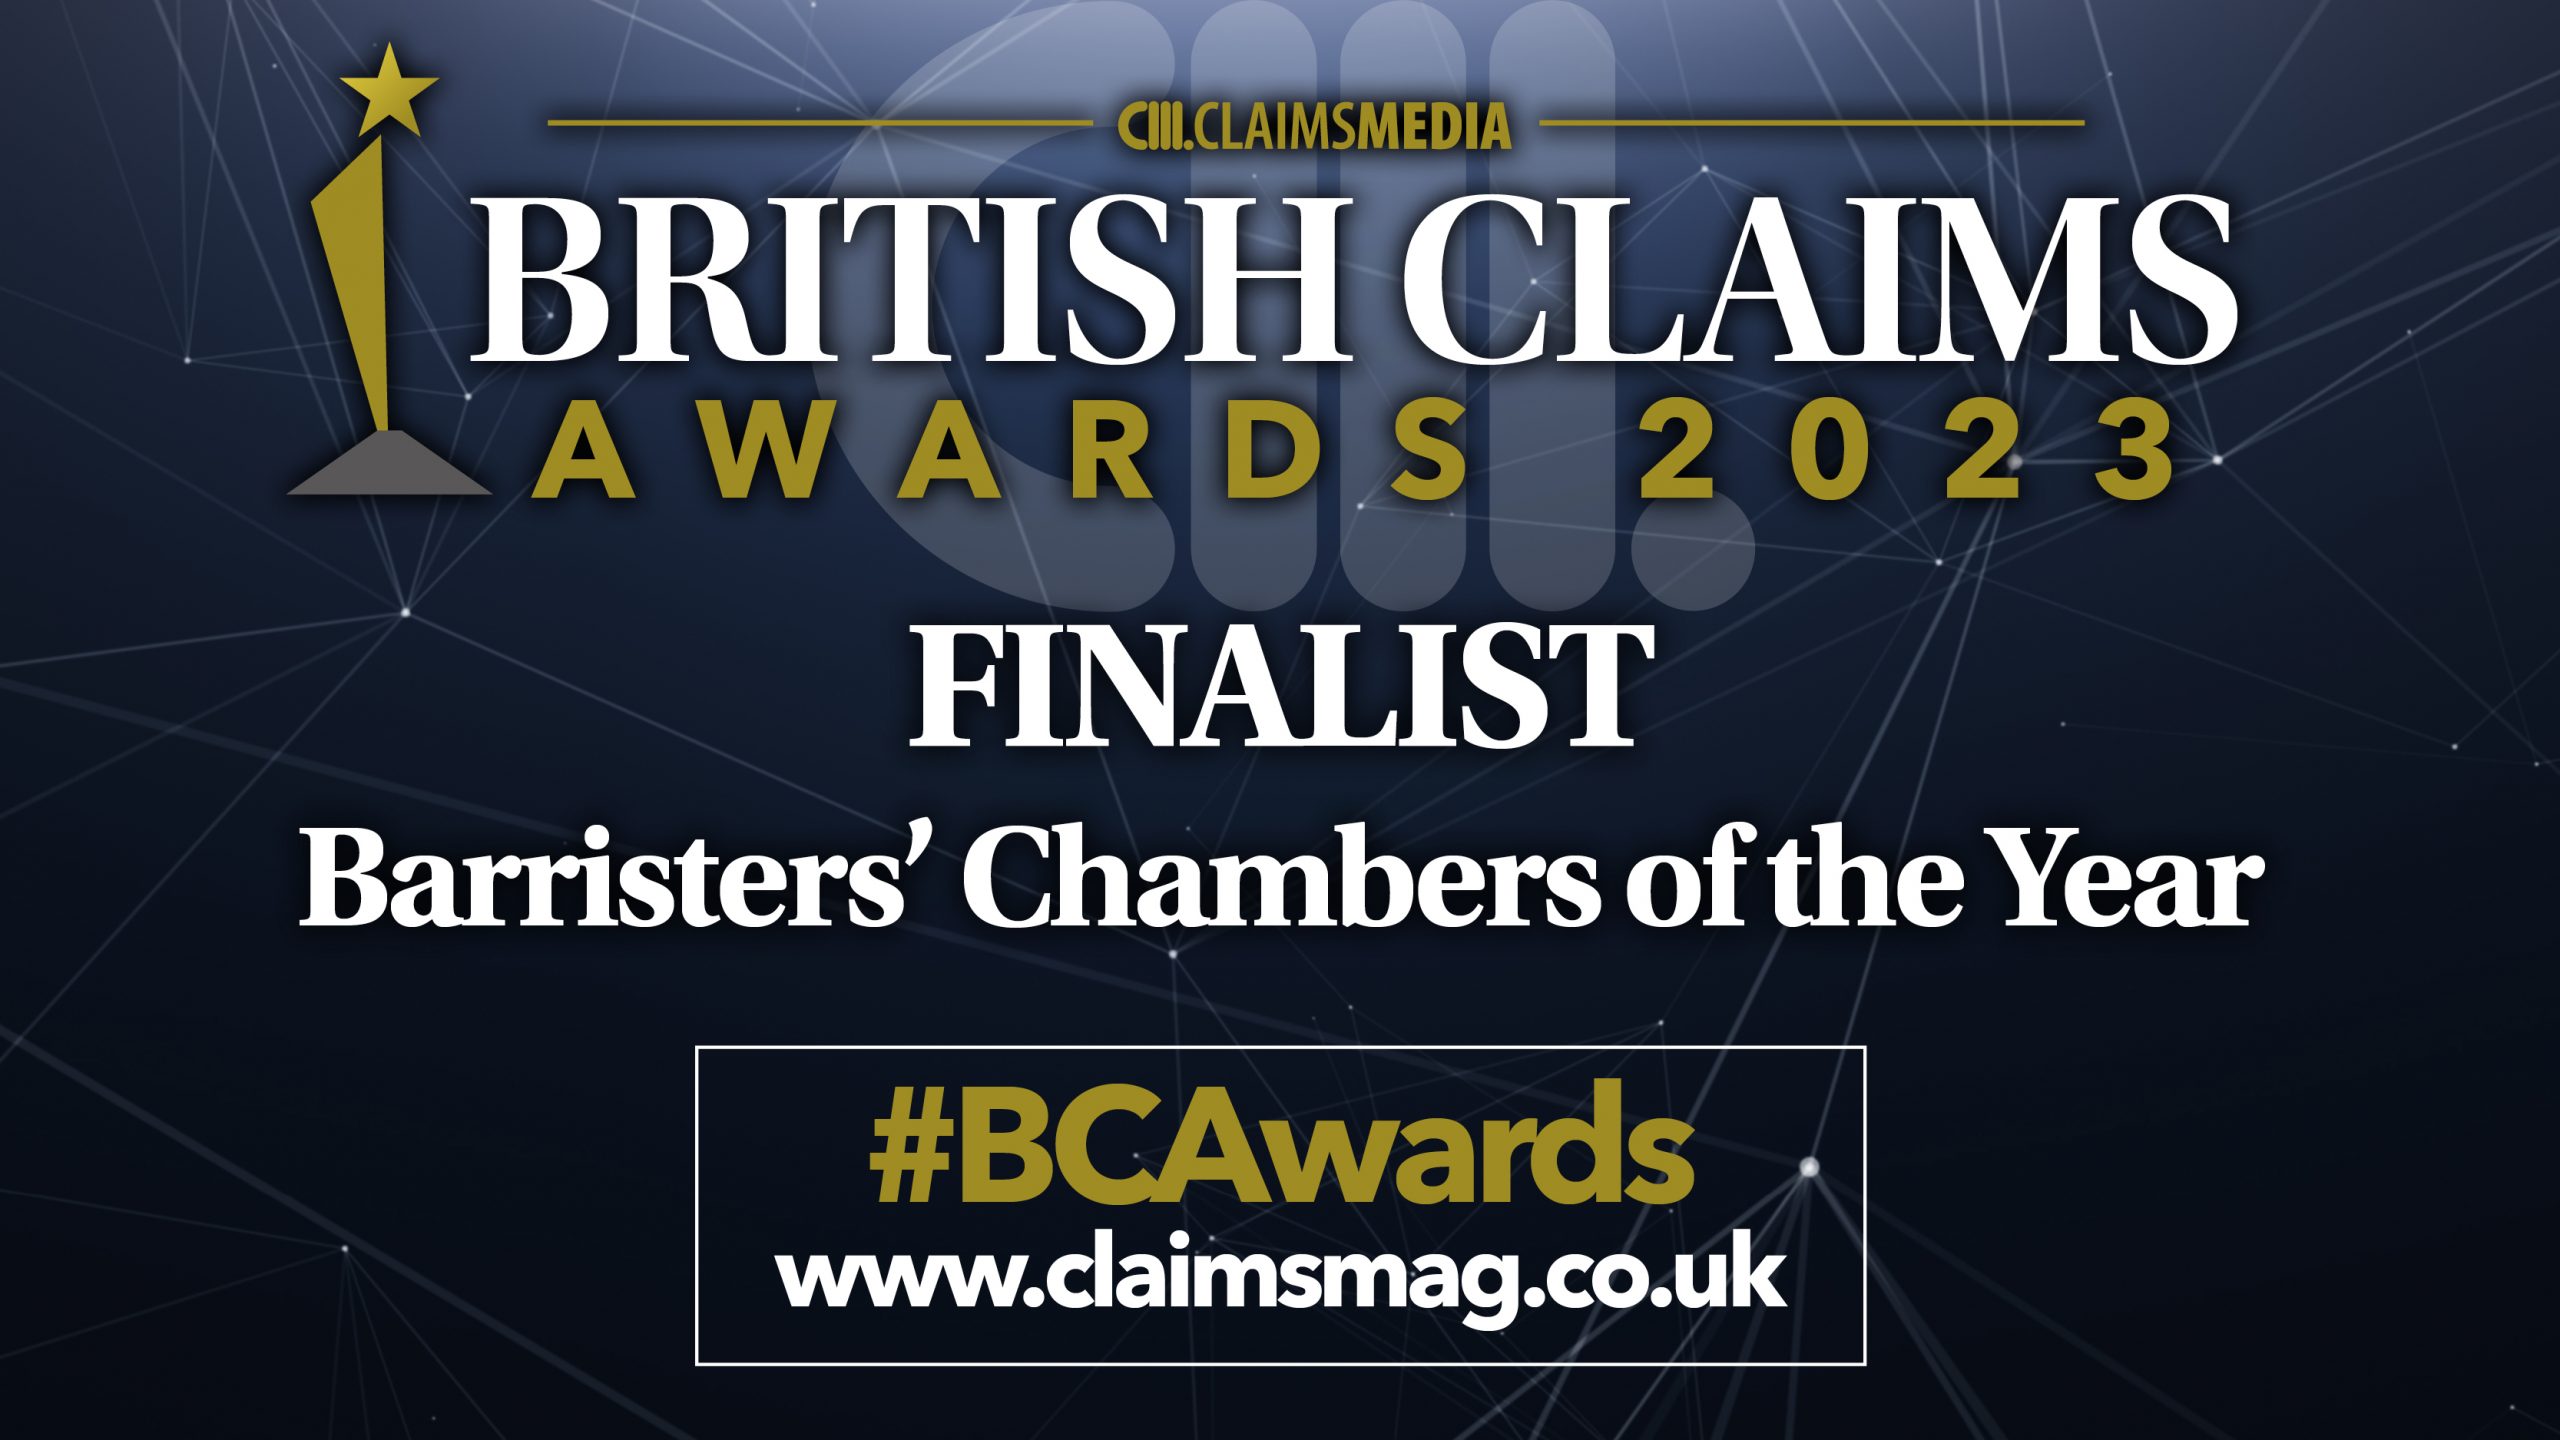 PARKLANE PLOWDEN CHAMBERS ARE SHORTLISTED AT THE BRITISH CLAIMS AWARDS 2023